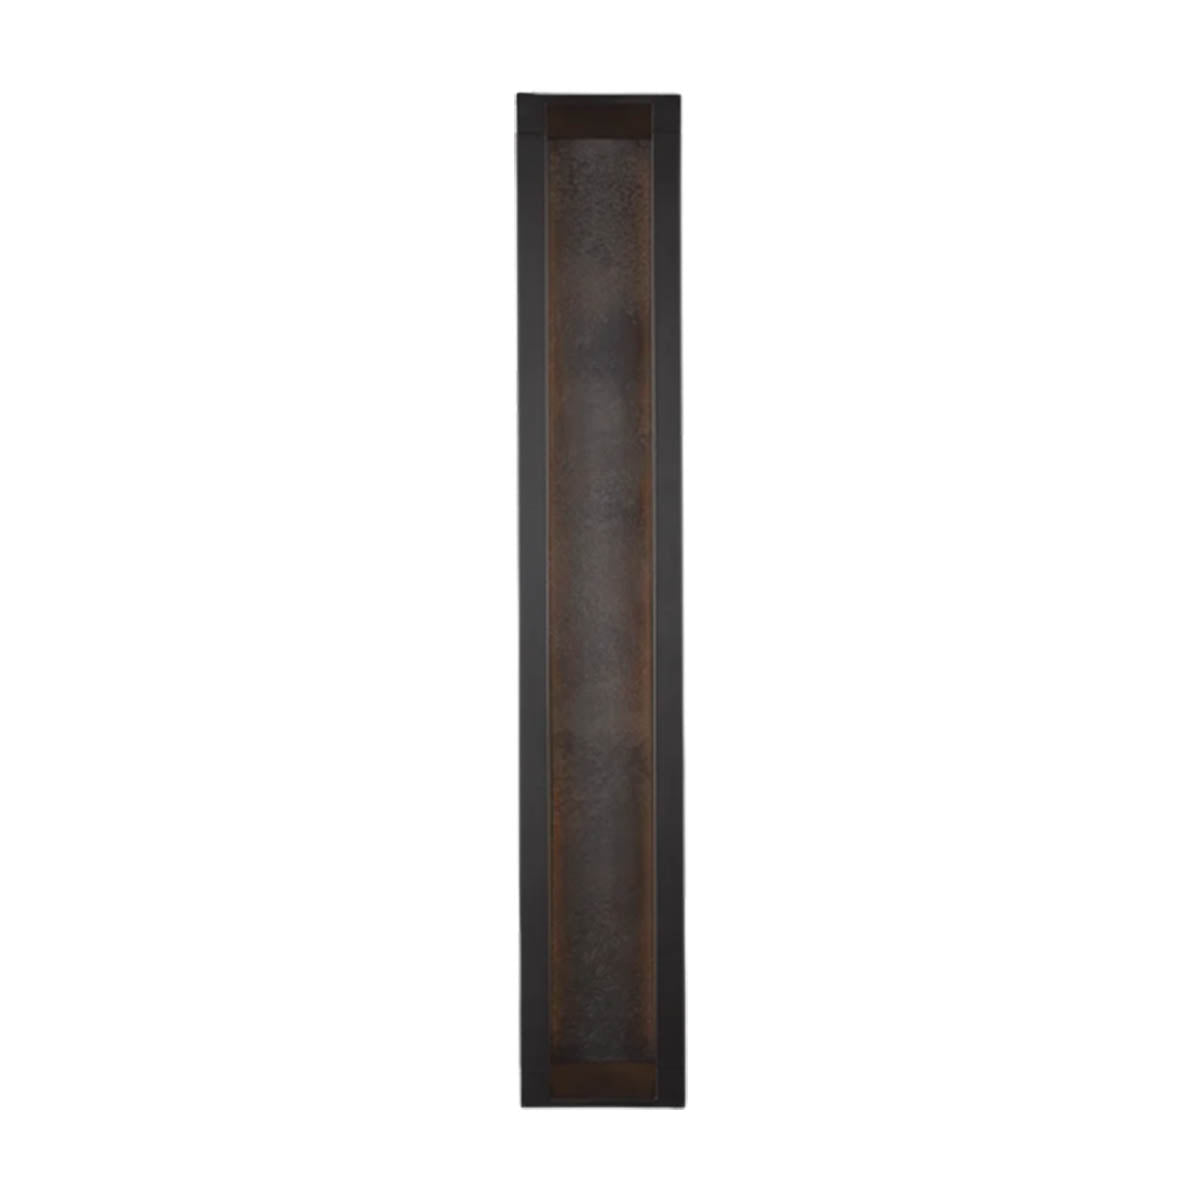 Mattix 37 In. LED Wall Sconce Oil Rubbed Bronze Finish